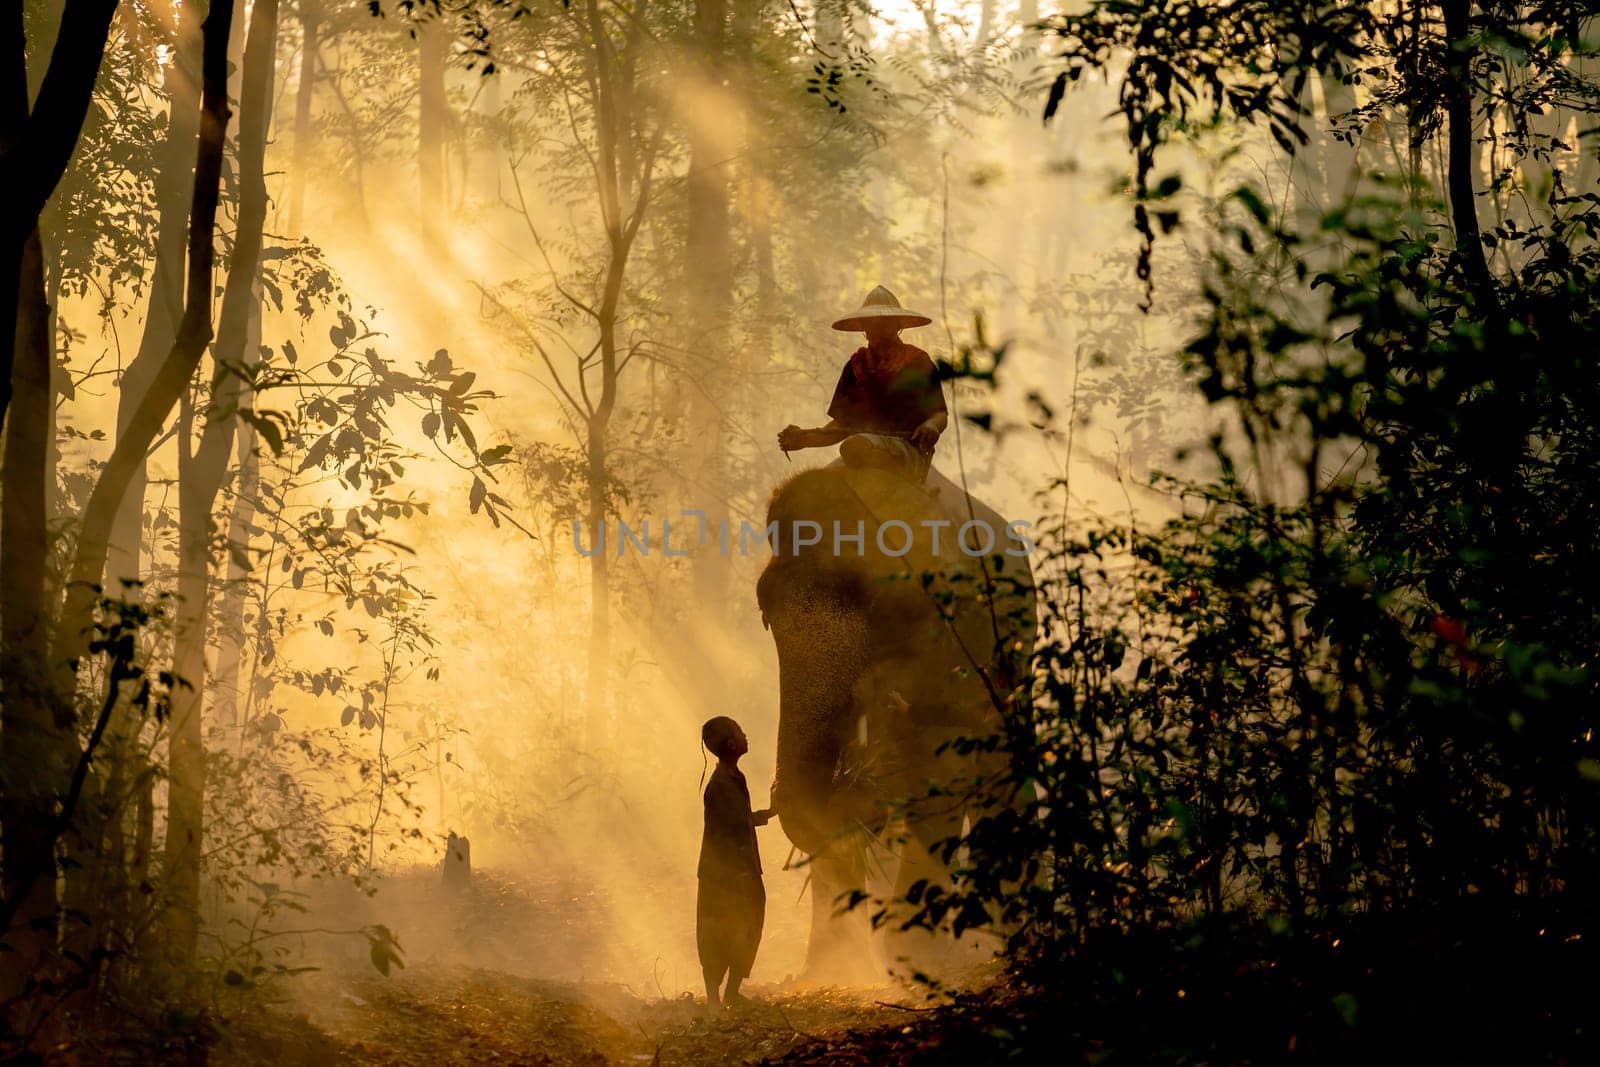 Silhouette of little boy stand and touch leg of elephant also look to mahout with sunlight shine through tree in forest in concept of good relationship between human and wildlife animal. by nrradmin